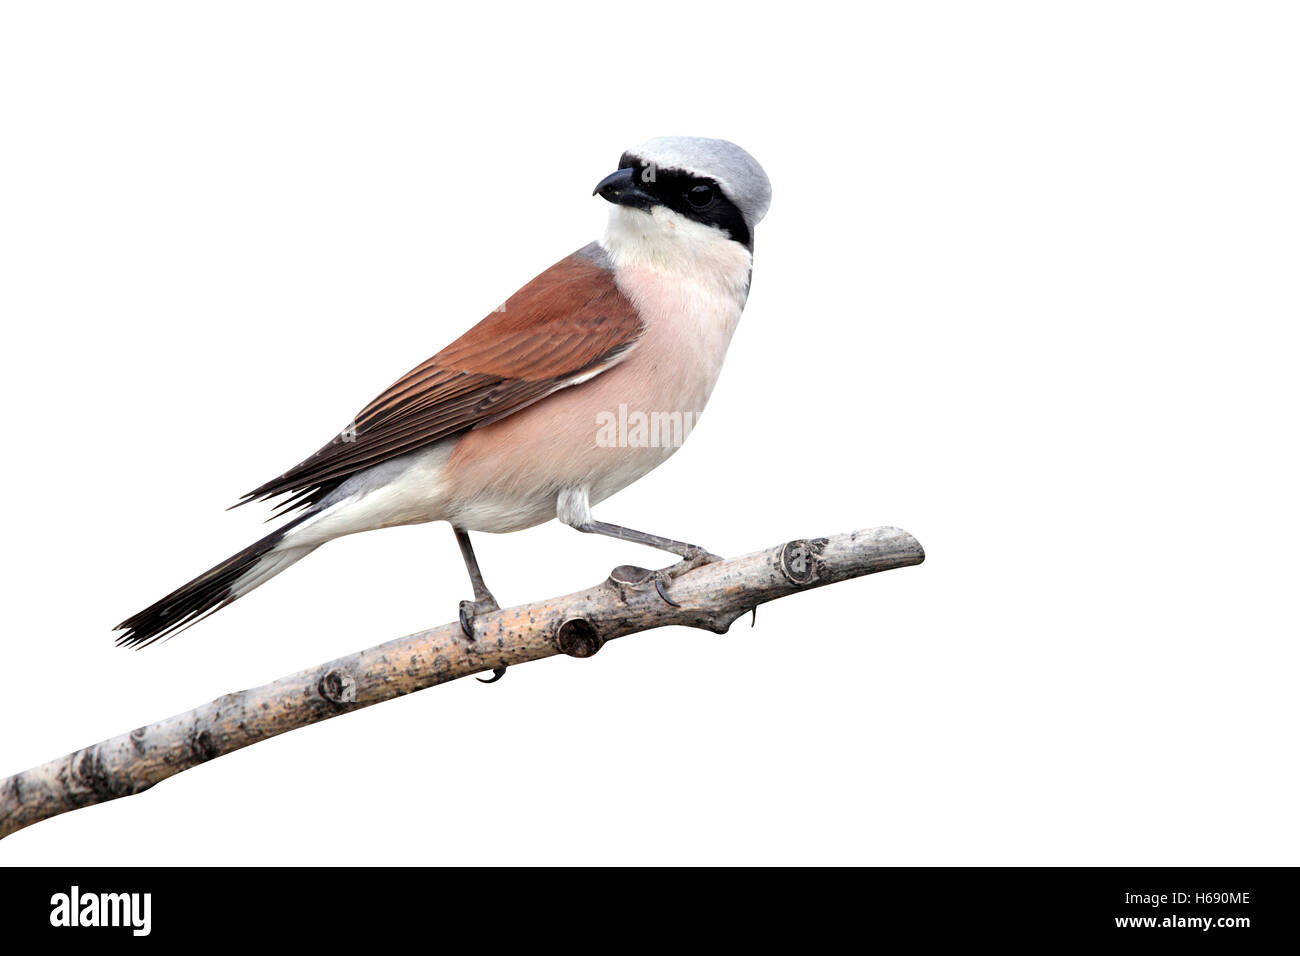 Red-backed shrike, Lanius collurio, single male perched on branch, Bulgaria, May 2010 Stock Photo